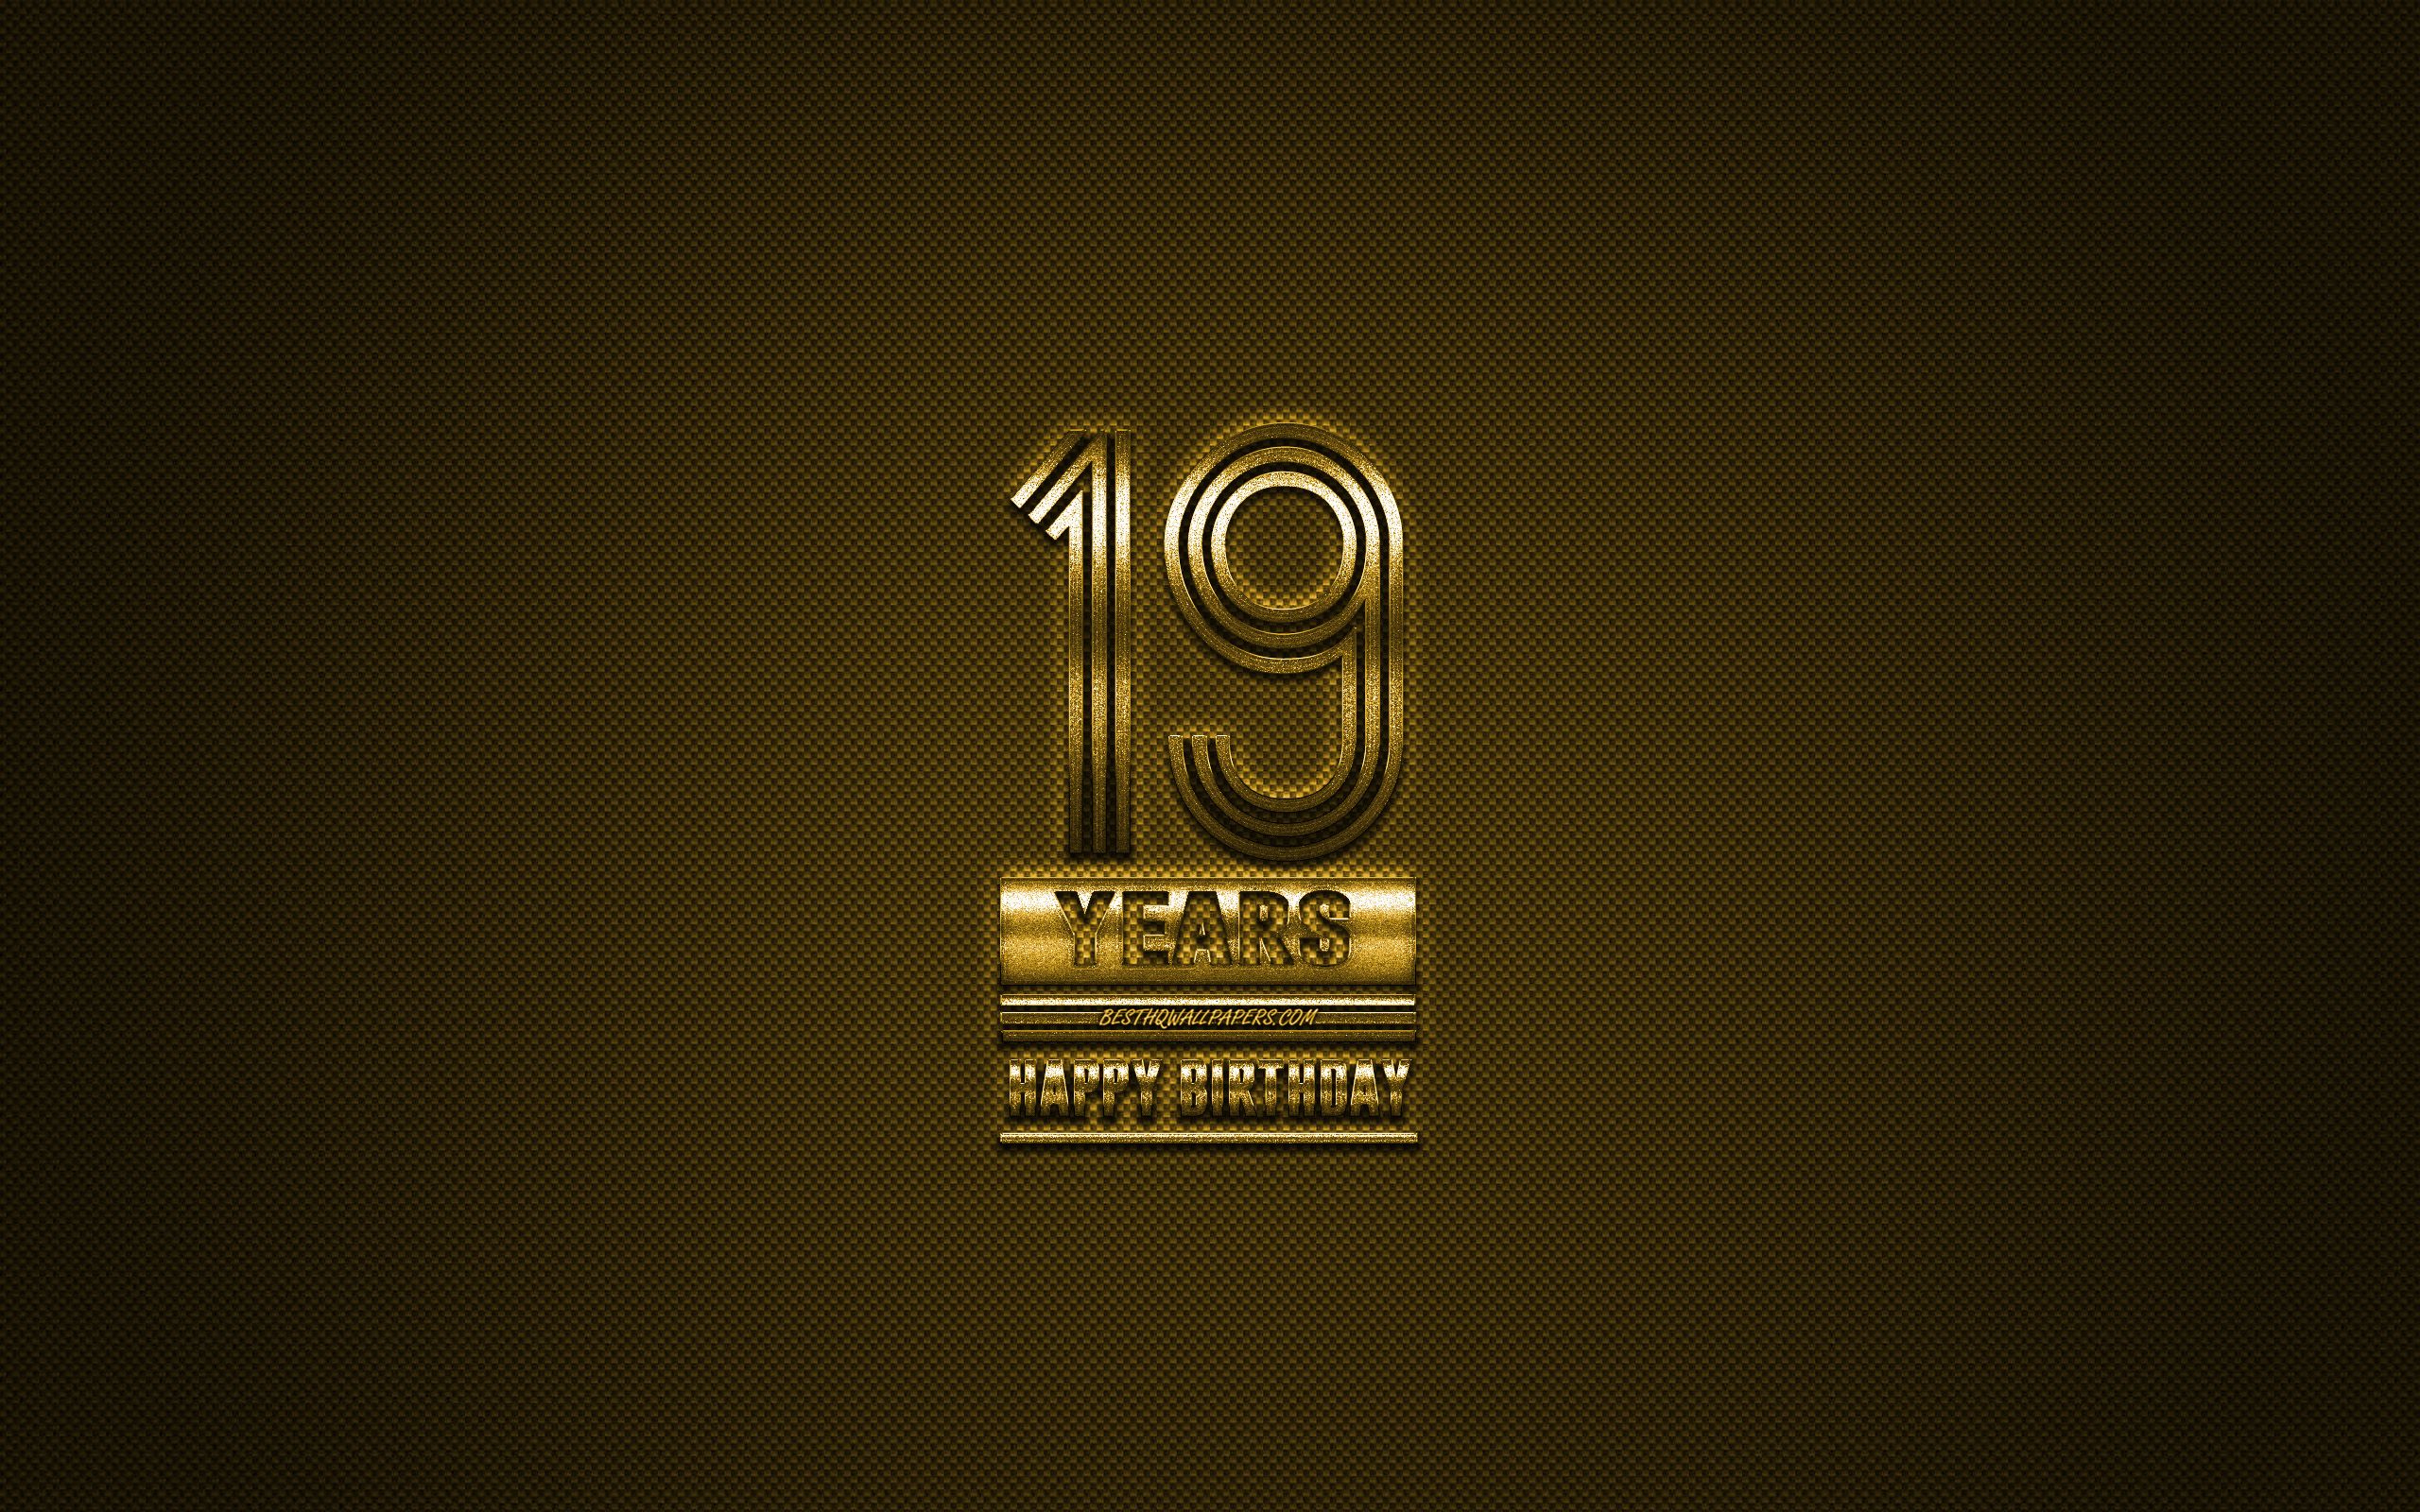 Download wallpaper 19th Happy Birthday, Golden letters, Golden Birthday background, 19 Years Birthday, Happy 19th Birthday, golden carbon background, Happy Birthday, greeting card, Happy 19 Years Birthday for desktop with resolution 2560x1600